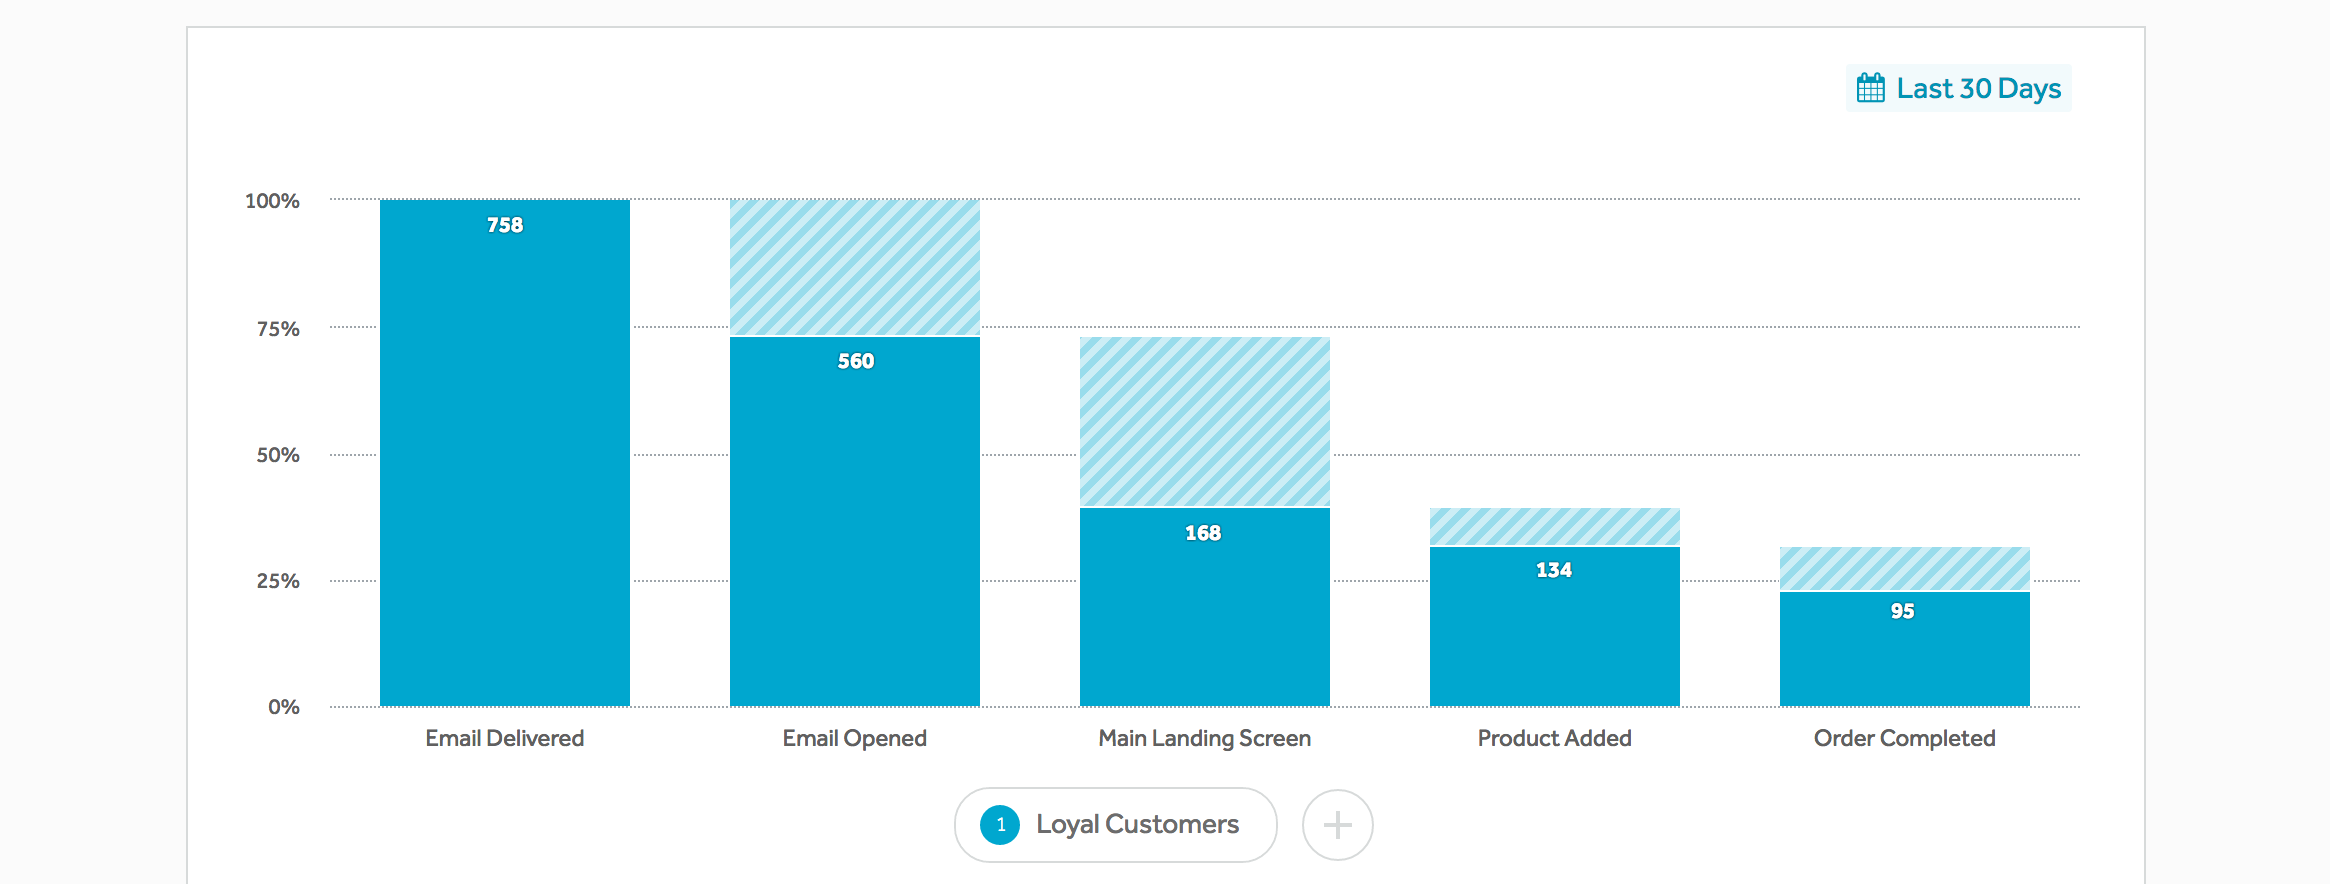 A bar chart showing 758 emails delivered, 560 emails opened, 168 visits to the main landing screen, 134 products added to cart, and 95 purchases.